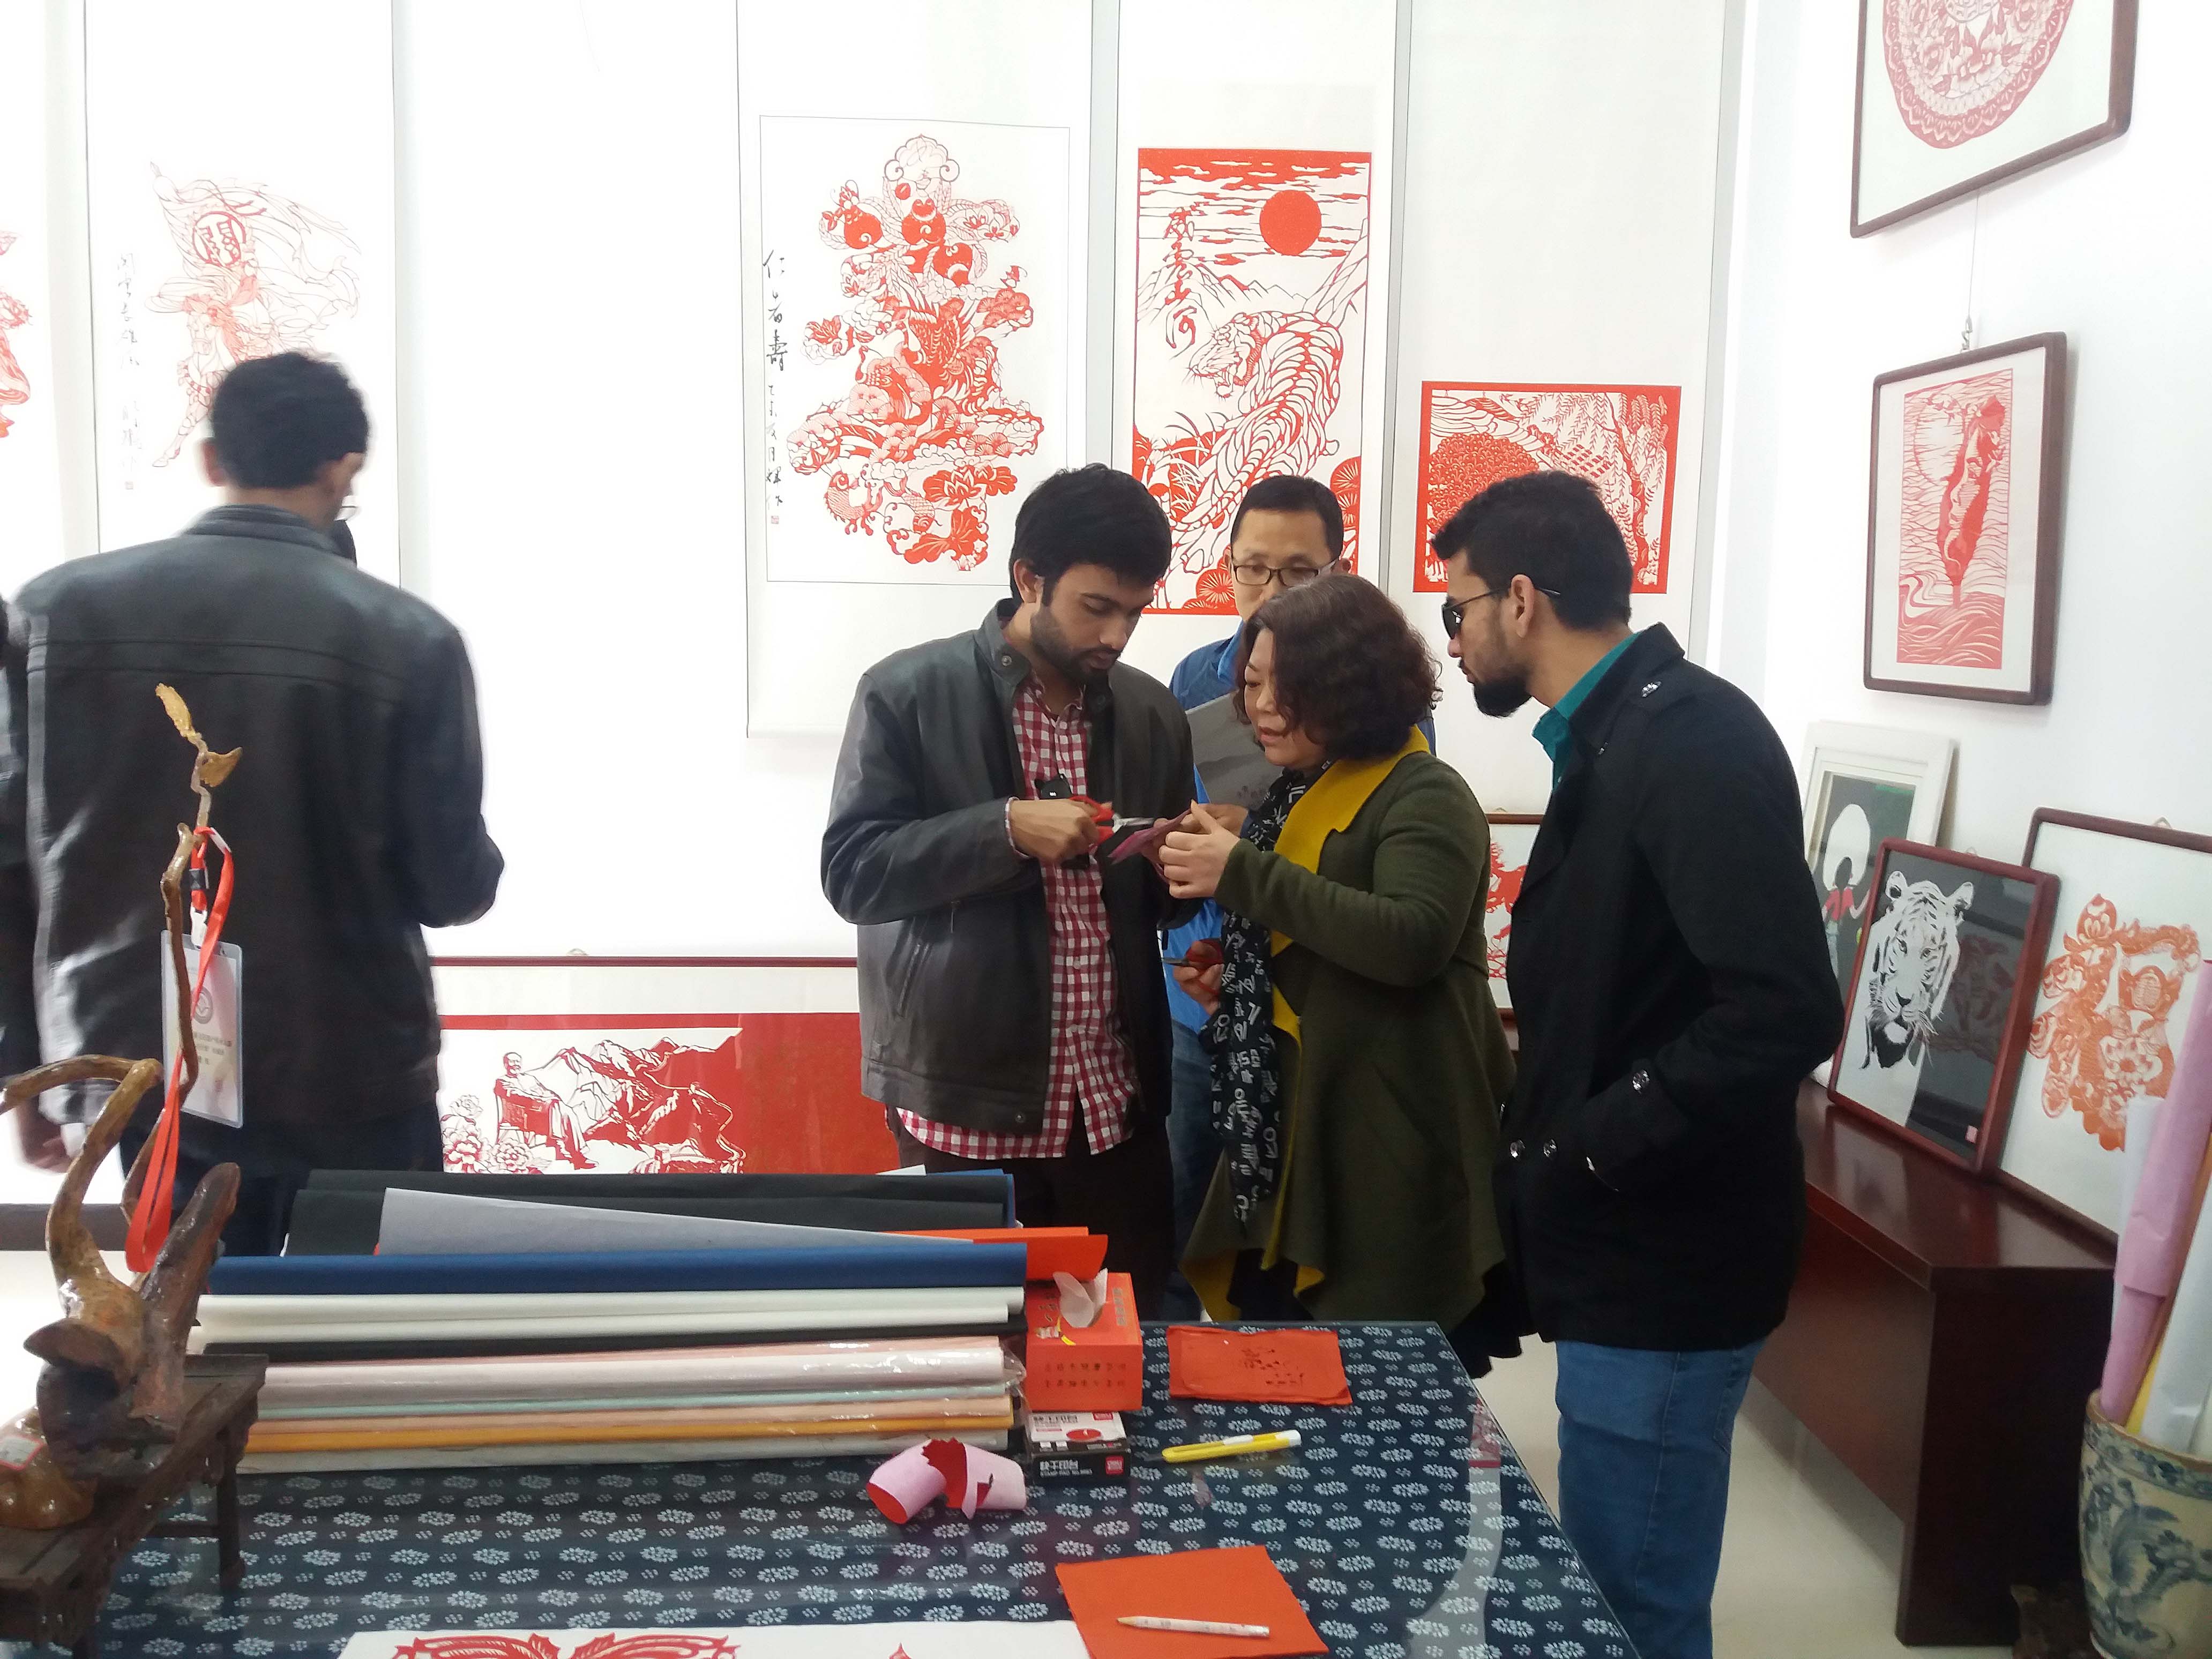 Learning Paper Cutting Art during a visit to Cultural Museum in Chongxin County